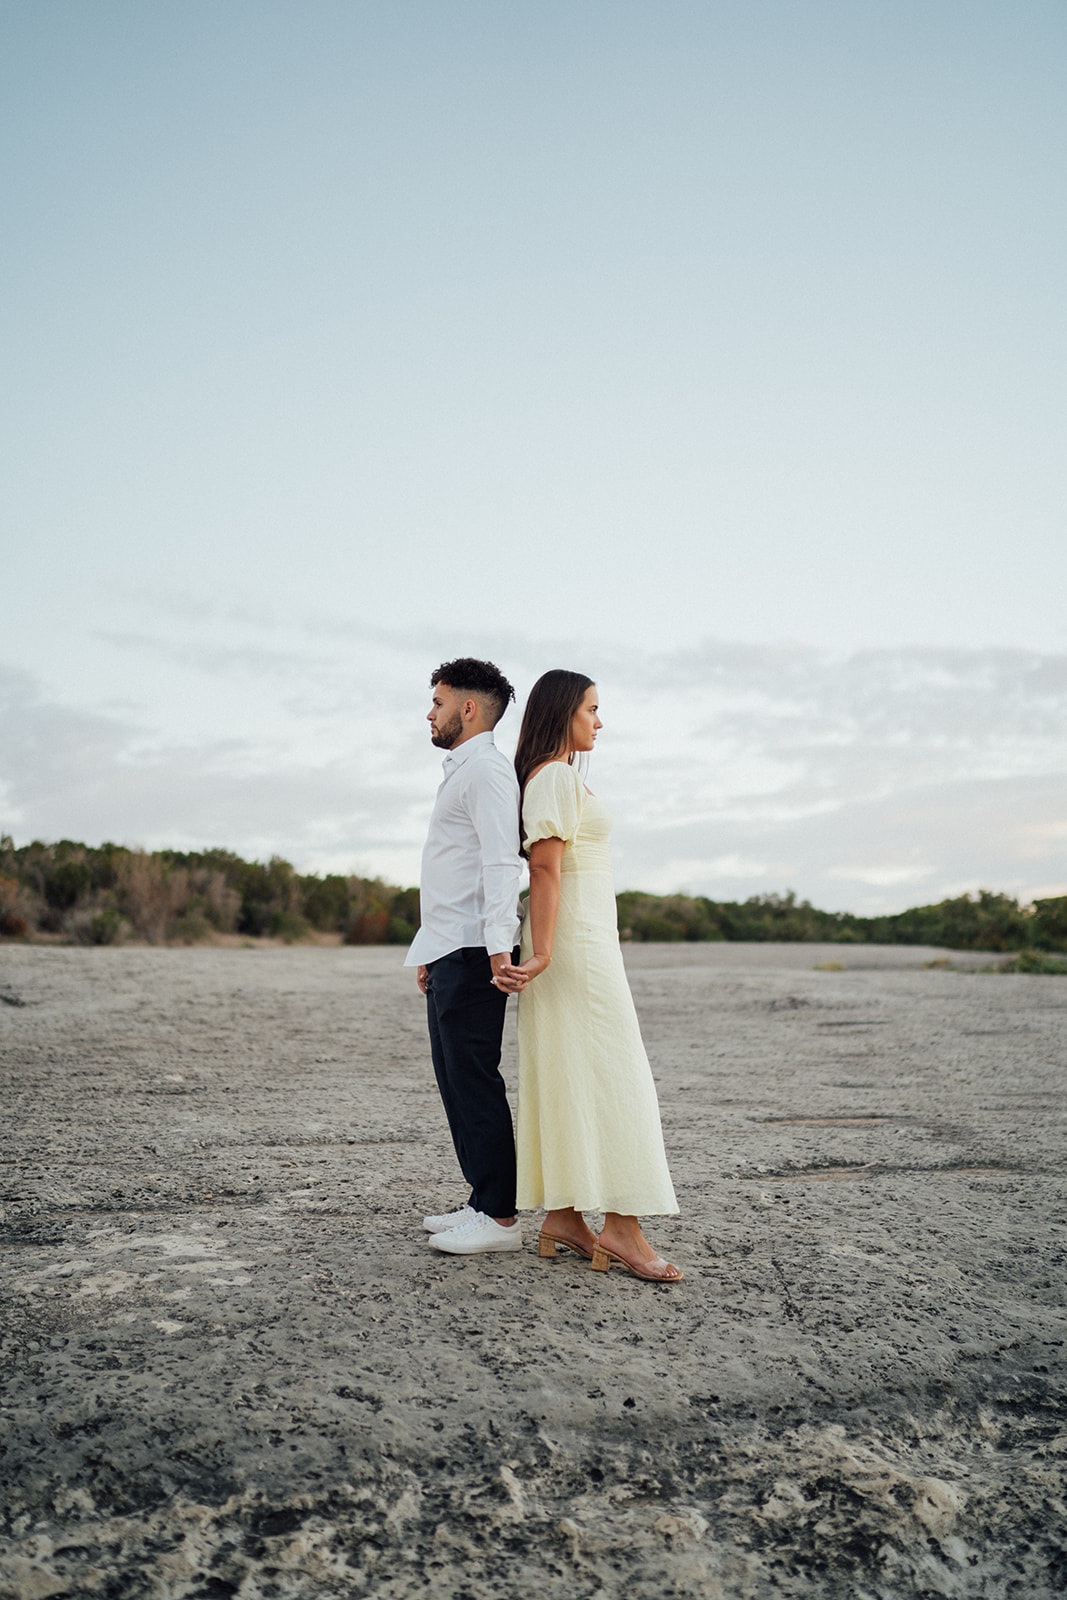 Taryn and Gavin embracing during their engagement photos at McKinney Falls